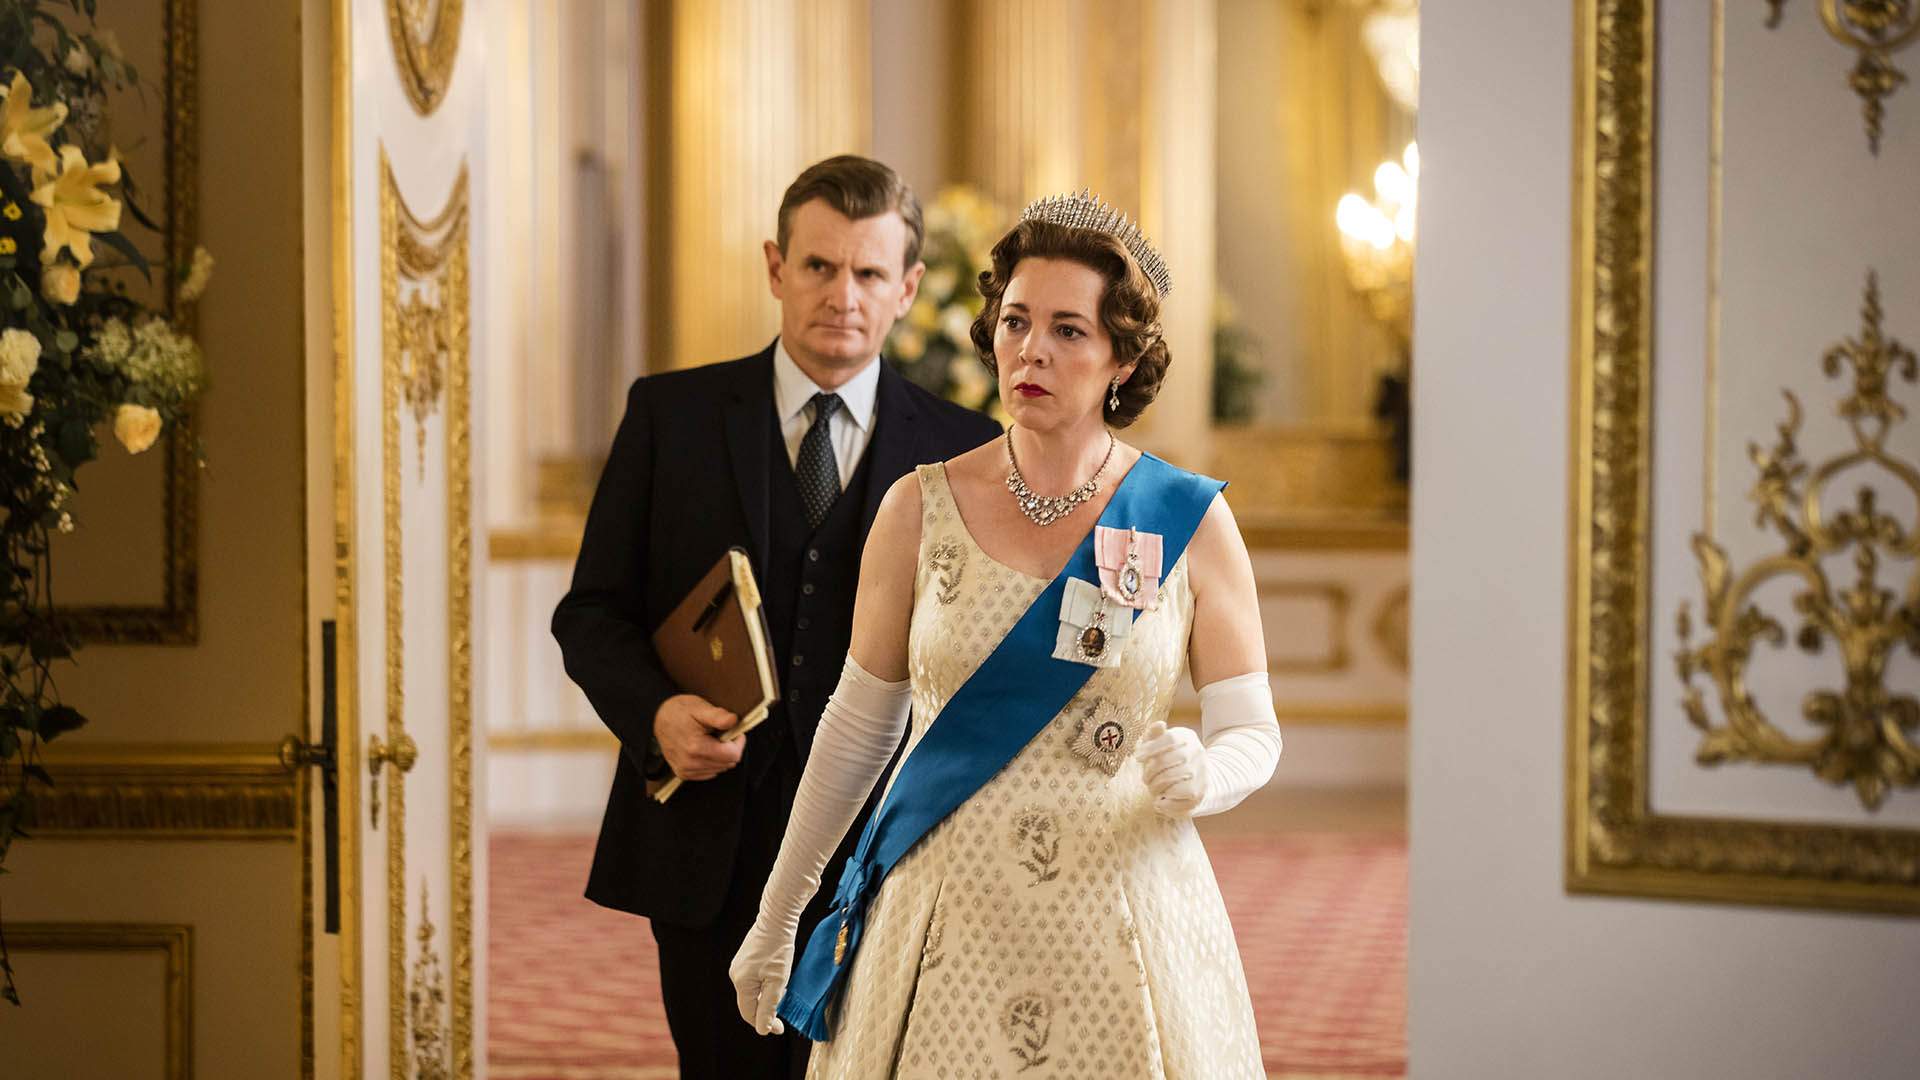 Netflix Will Wrap Up 'The Crown' and Its Royal Dramas After the Show's Fifth Season